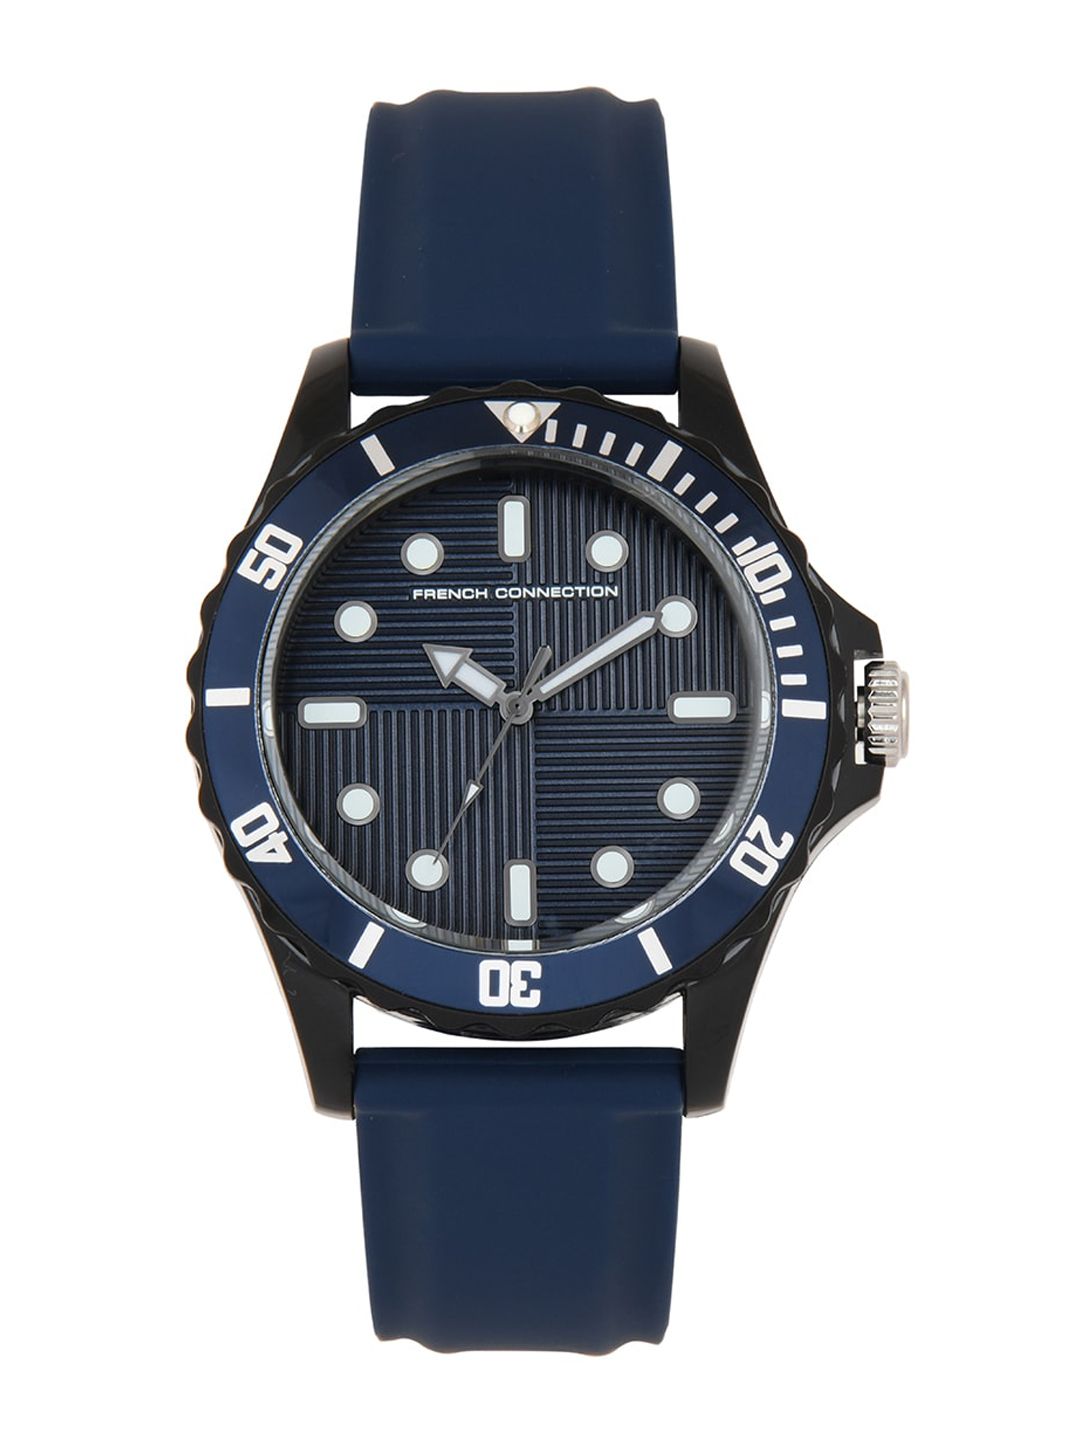 French Connection Unisex Navy Blue Analogue Watch Price in India